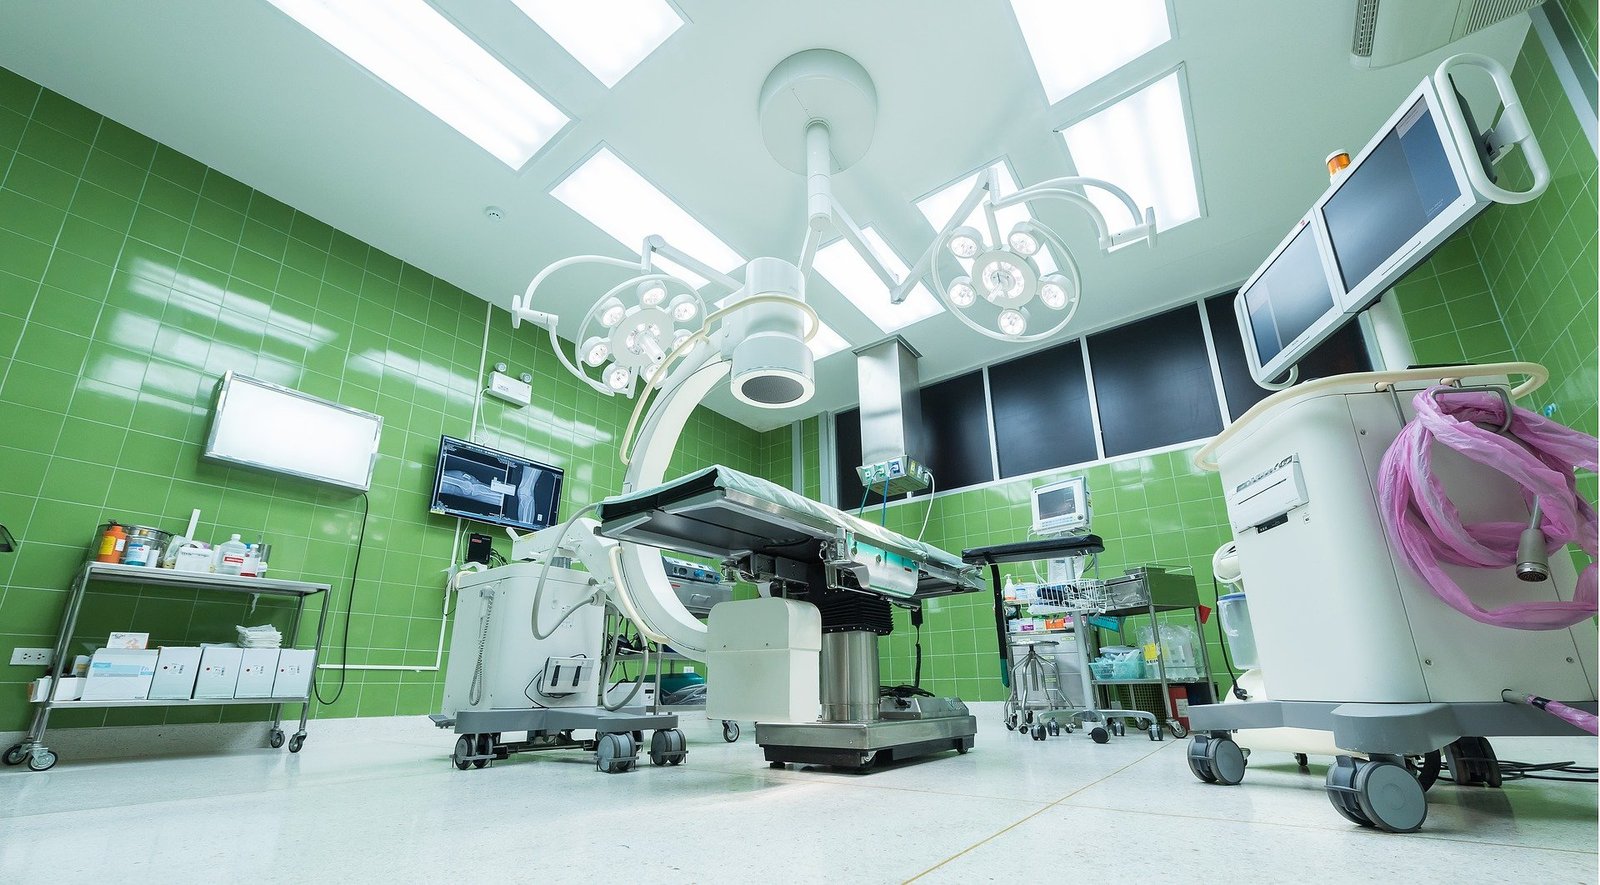 A potential flaw in operating room ventilation may increase risk of COVID-19 infection